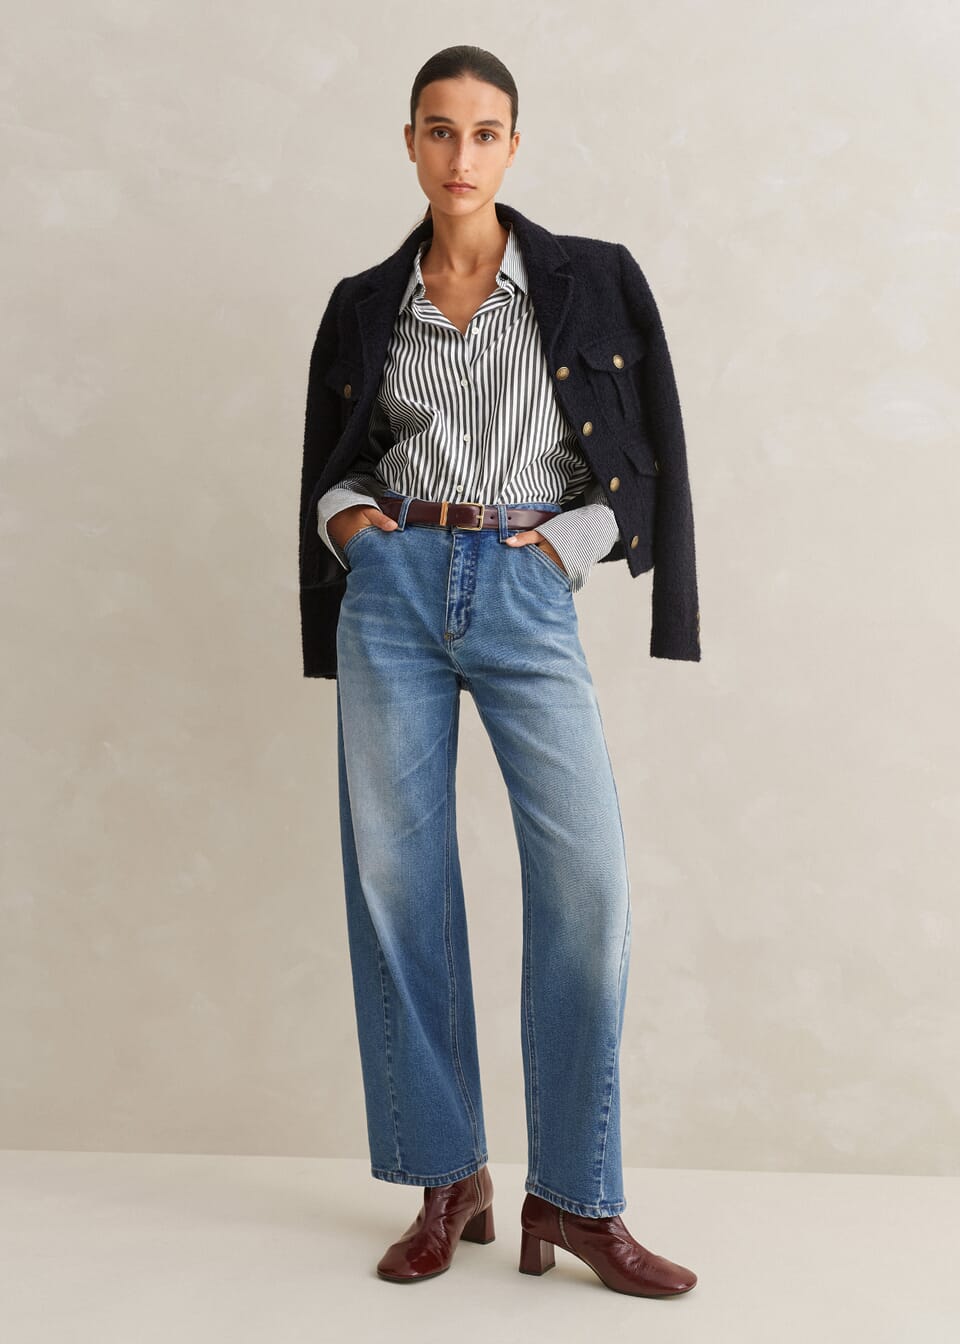 Me + Em's twisted seam jeans are bang on trend for 2024. They have just the right amount of fading over the thighs, a flattering high-rise waist and ankle-length silhouette, this made-in-Italy jean is a timeless wardrobe investment.